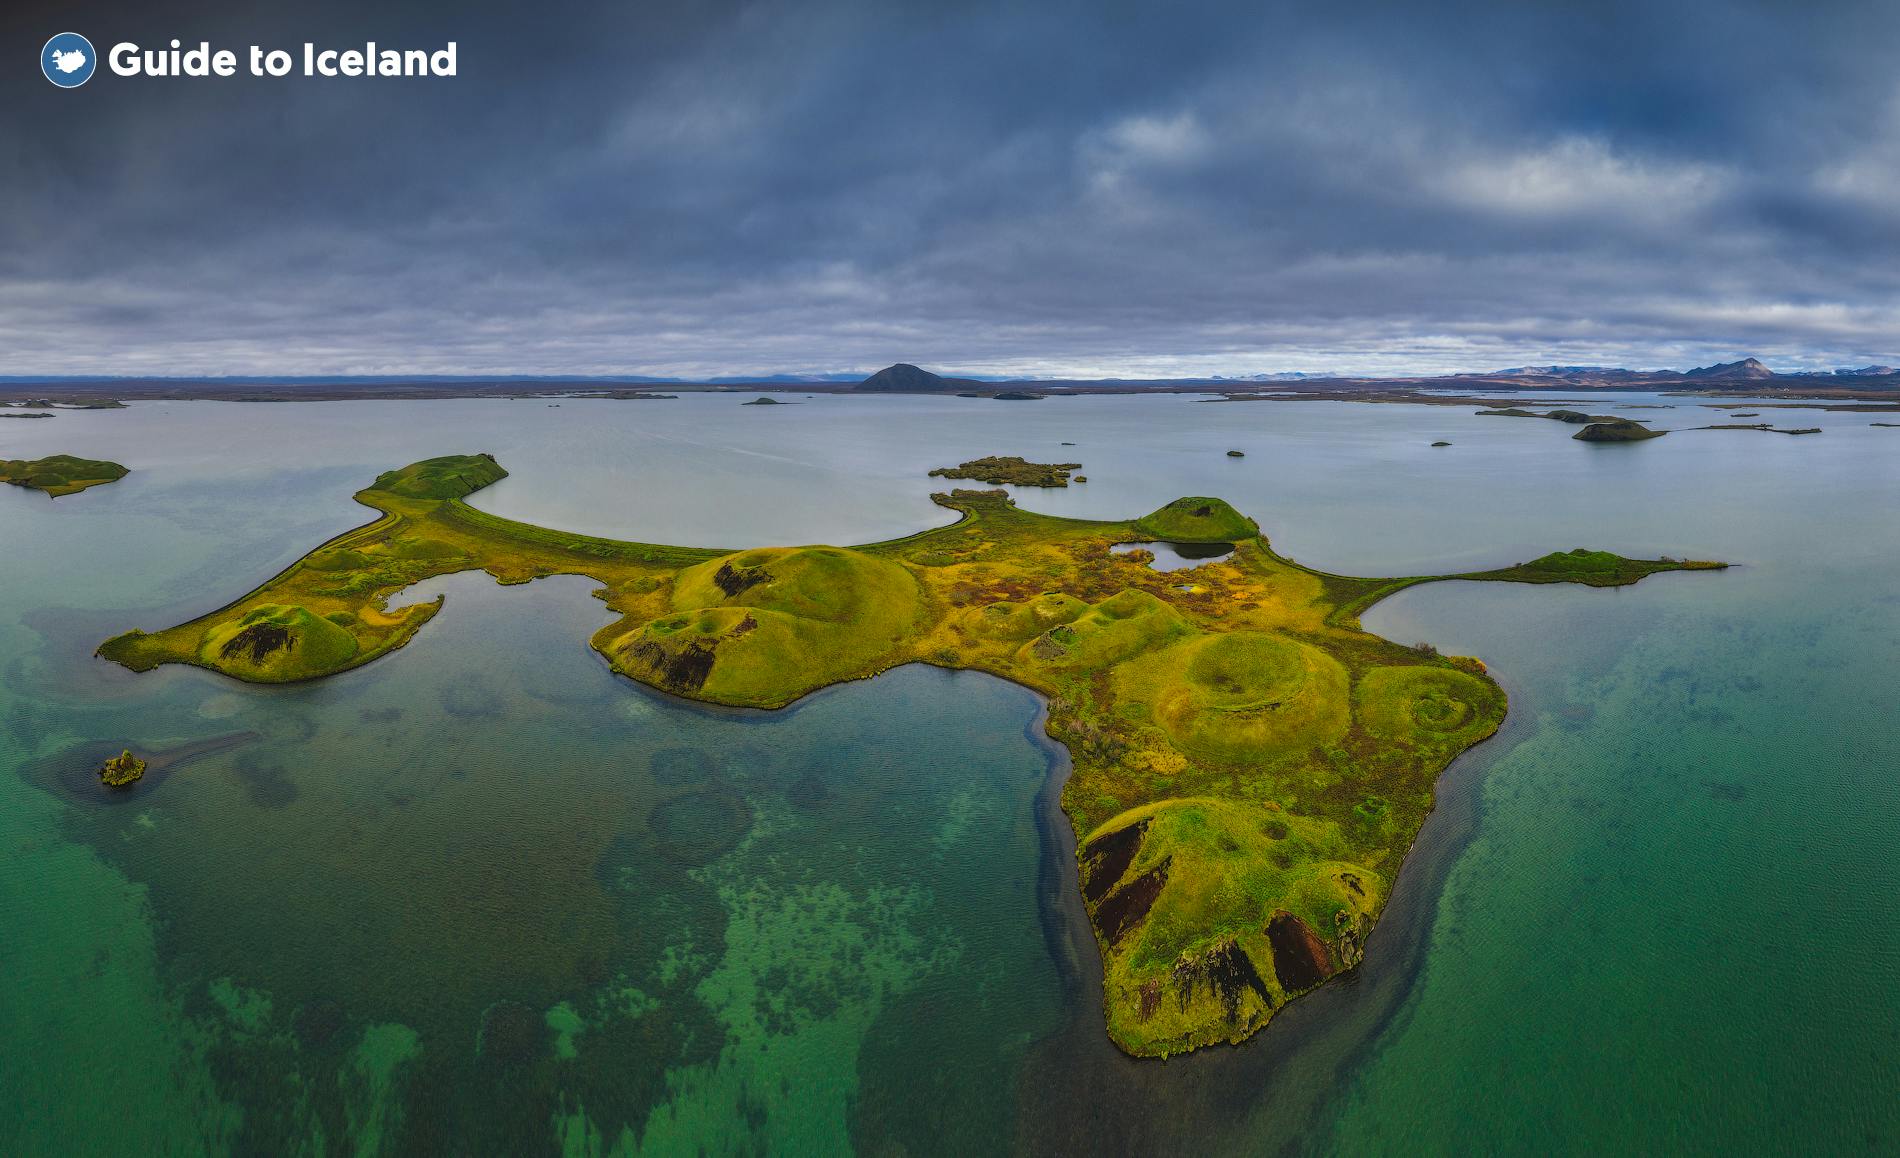 Lake Myvatn in North Iceland is a stunning natural attraction